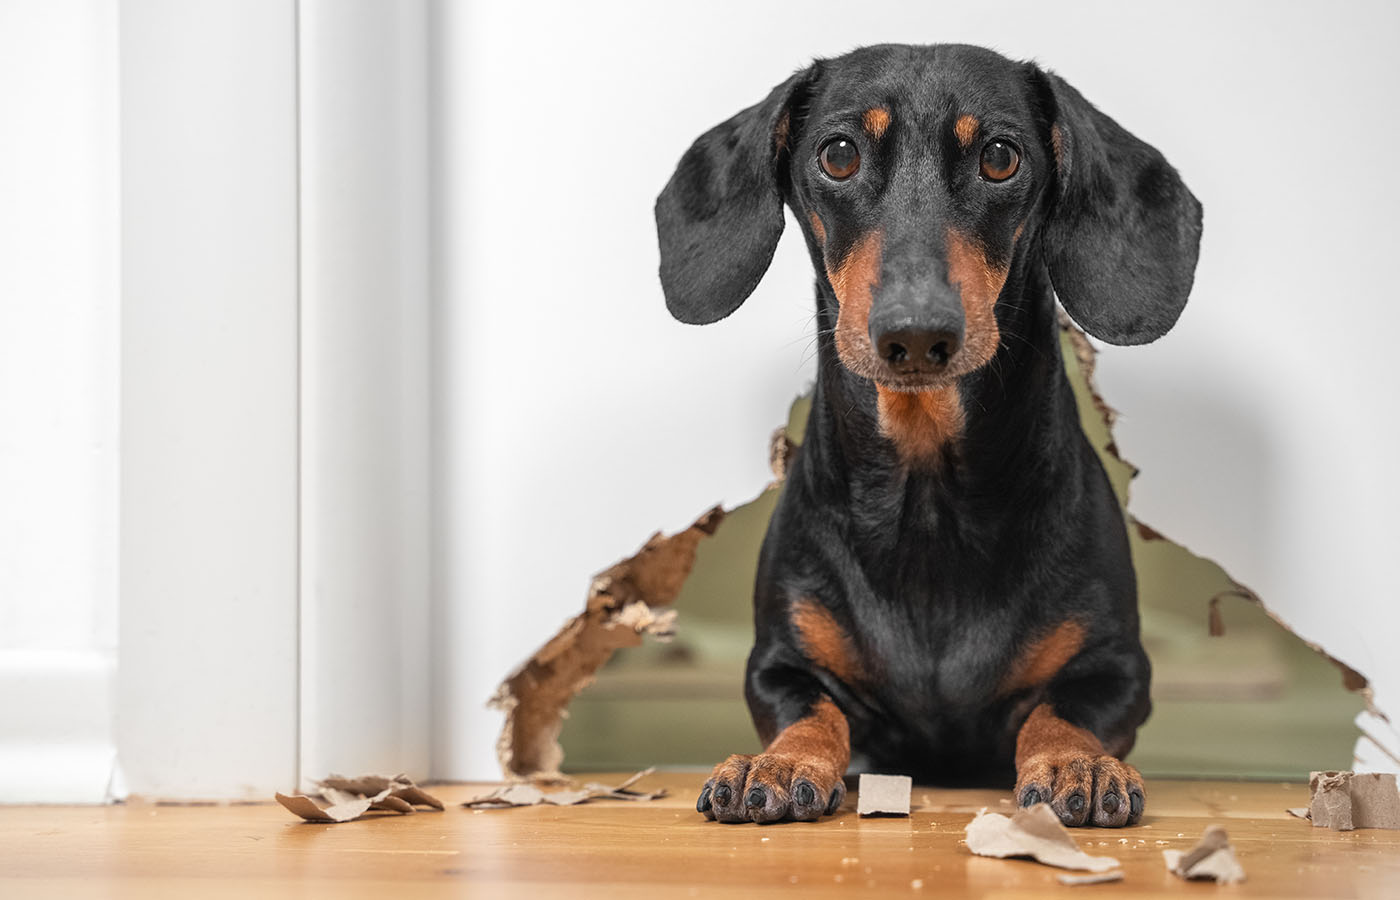 portrait of a cute dog dachshund piteously looks at the owner having done a mess in the house, gnawed through furniture and a hole in the door. not educated domestic pet.